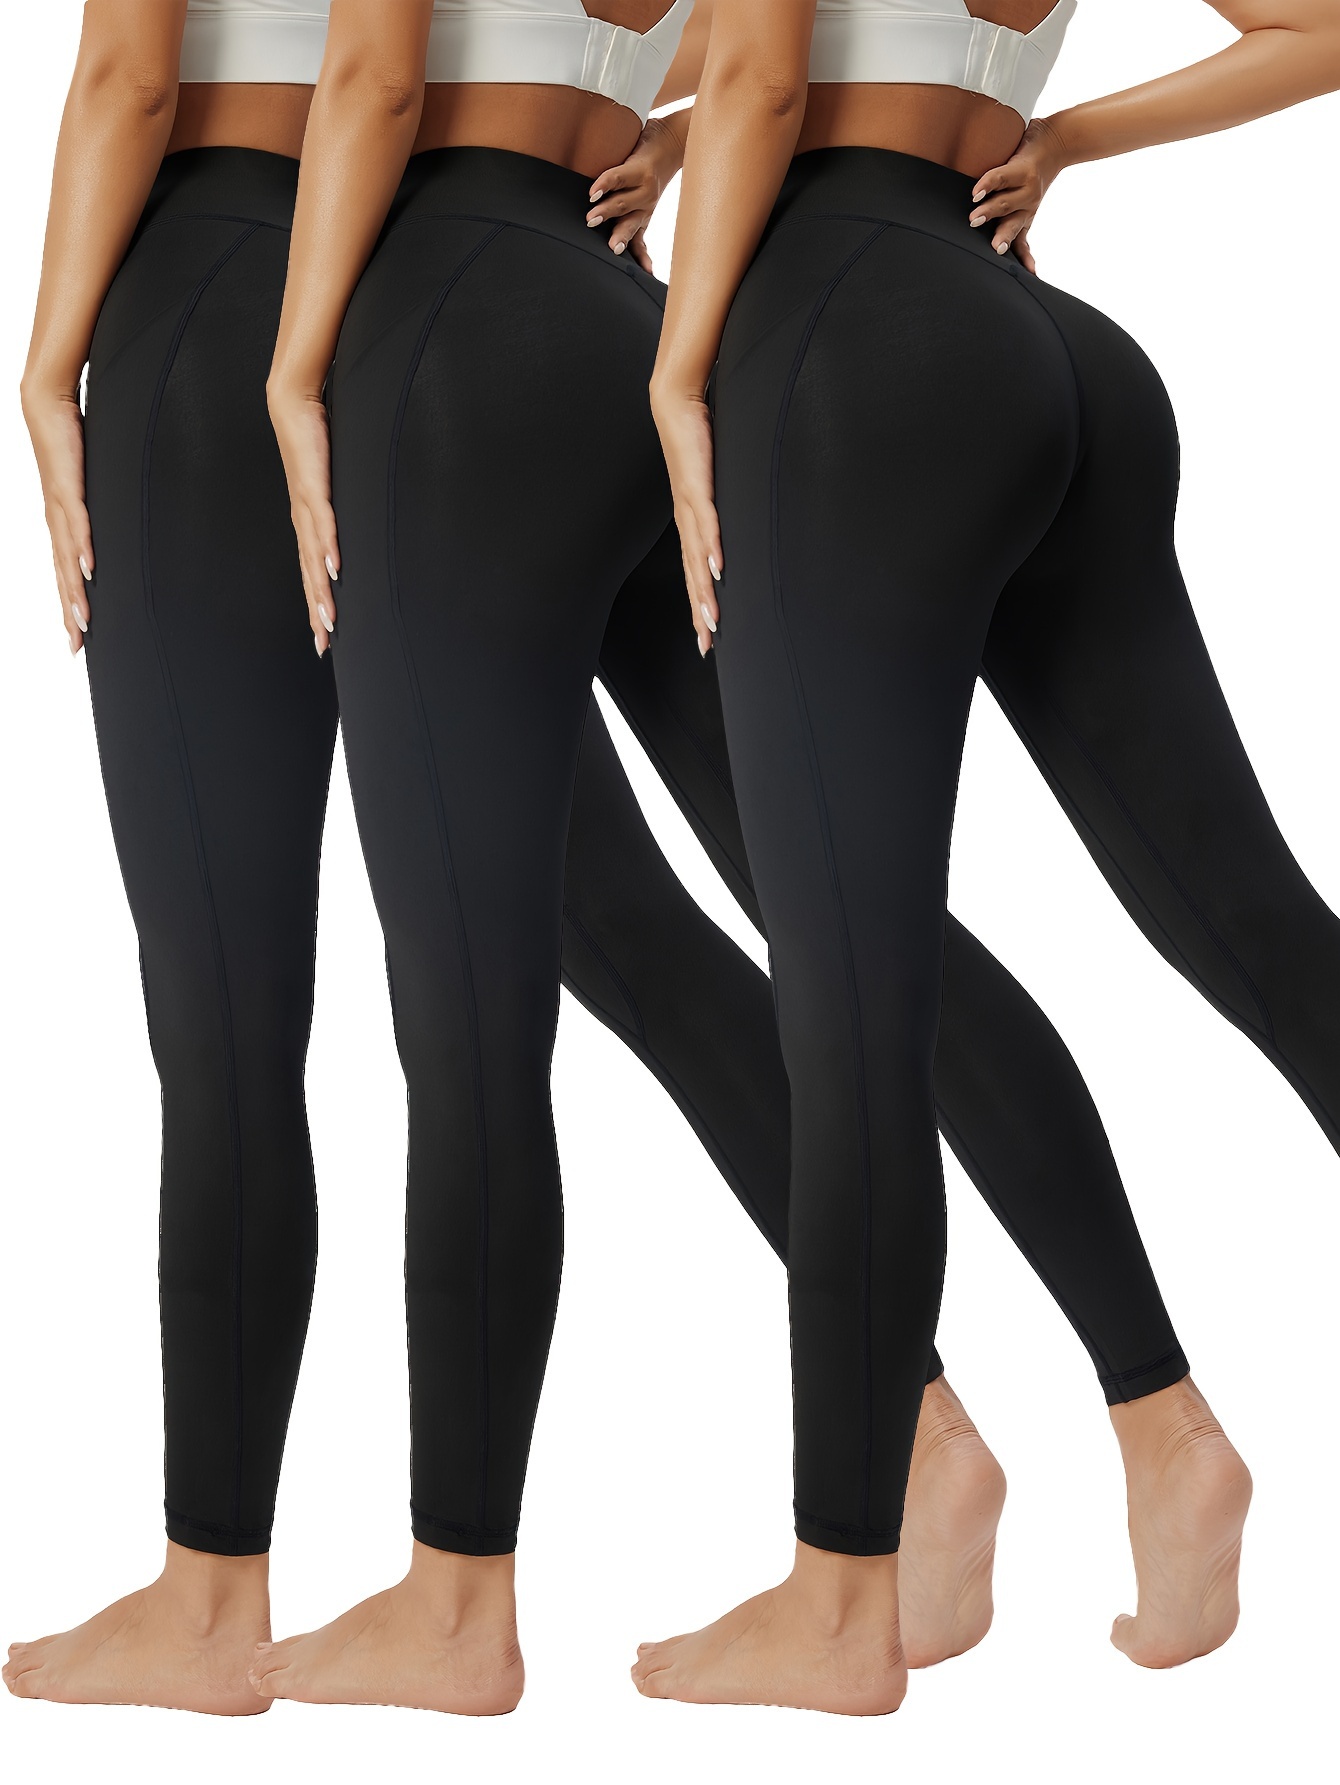 Sports Leggings For Women, High Waist Tummy Control Non See Through Workout  Pants With Pockets, Women's Activewear